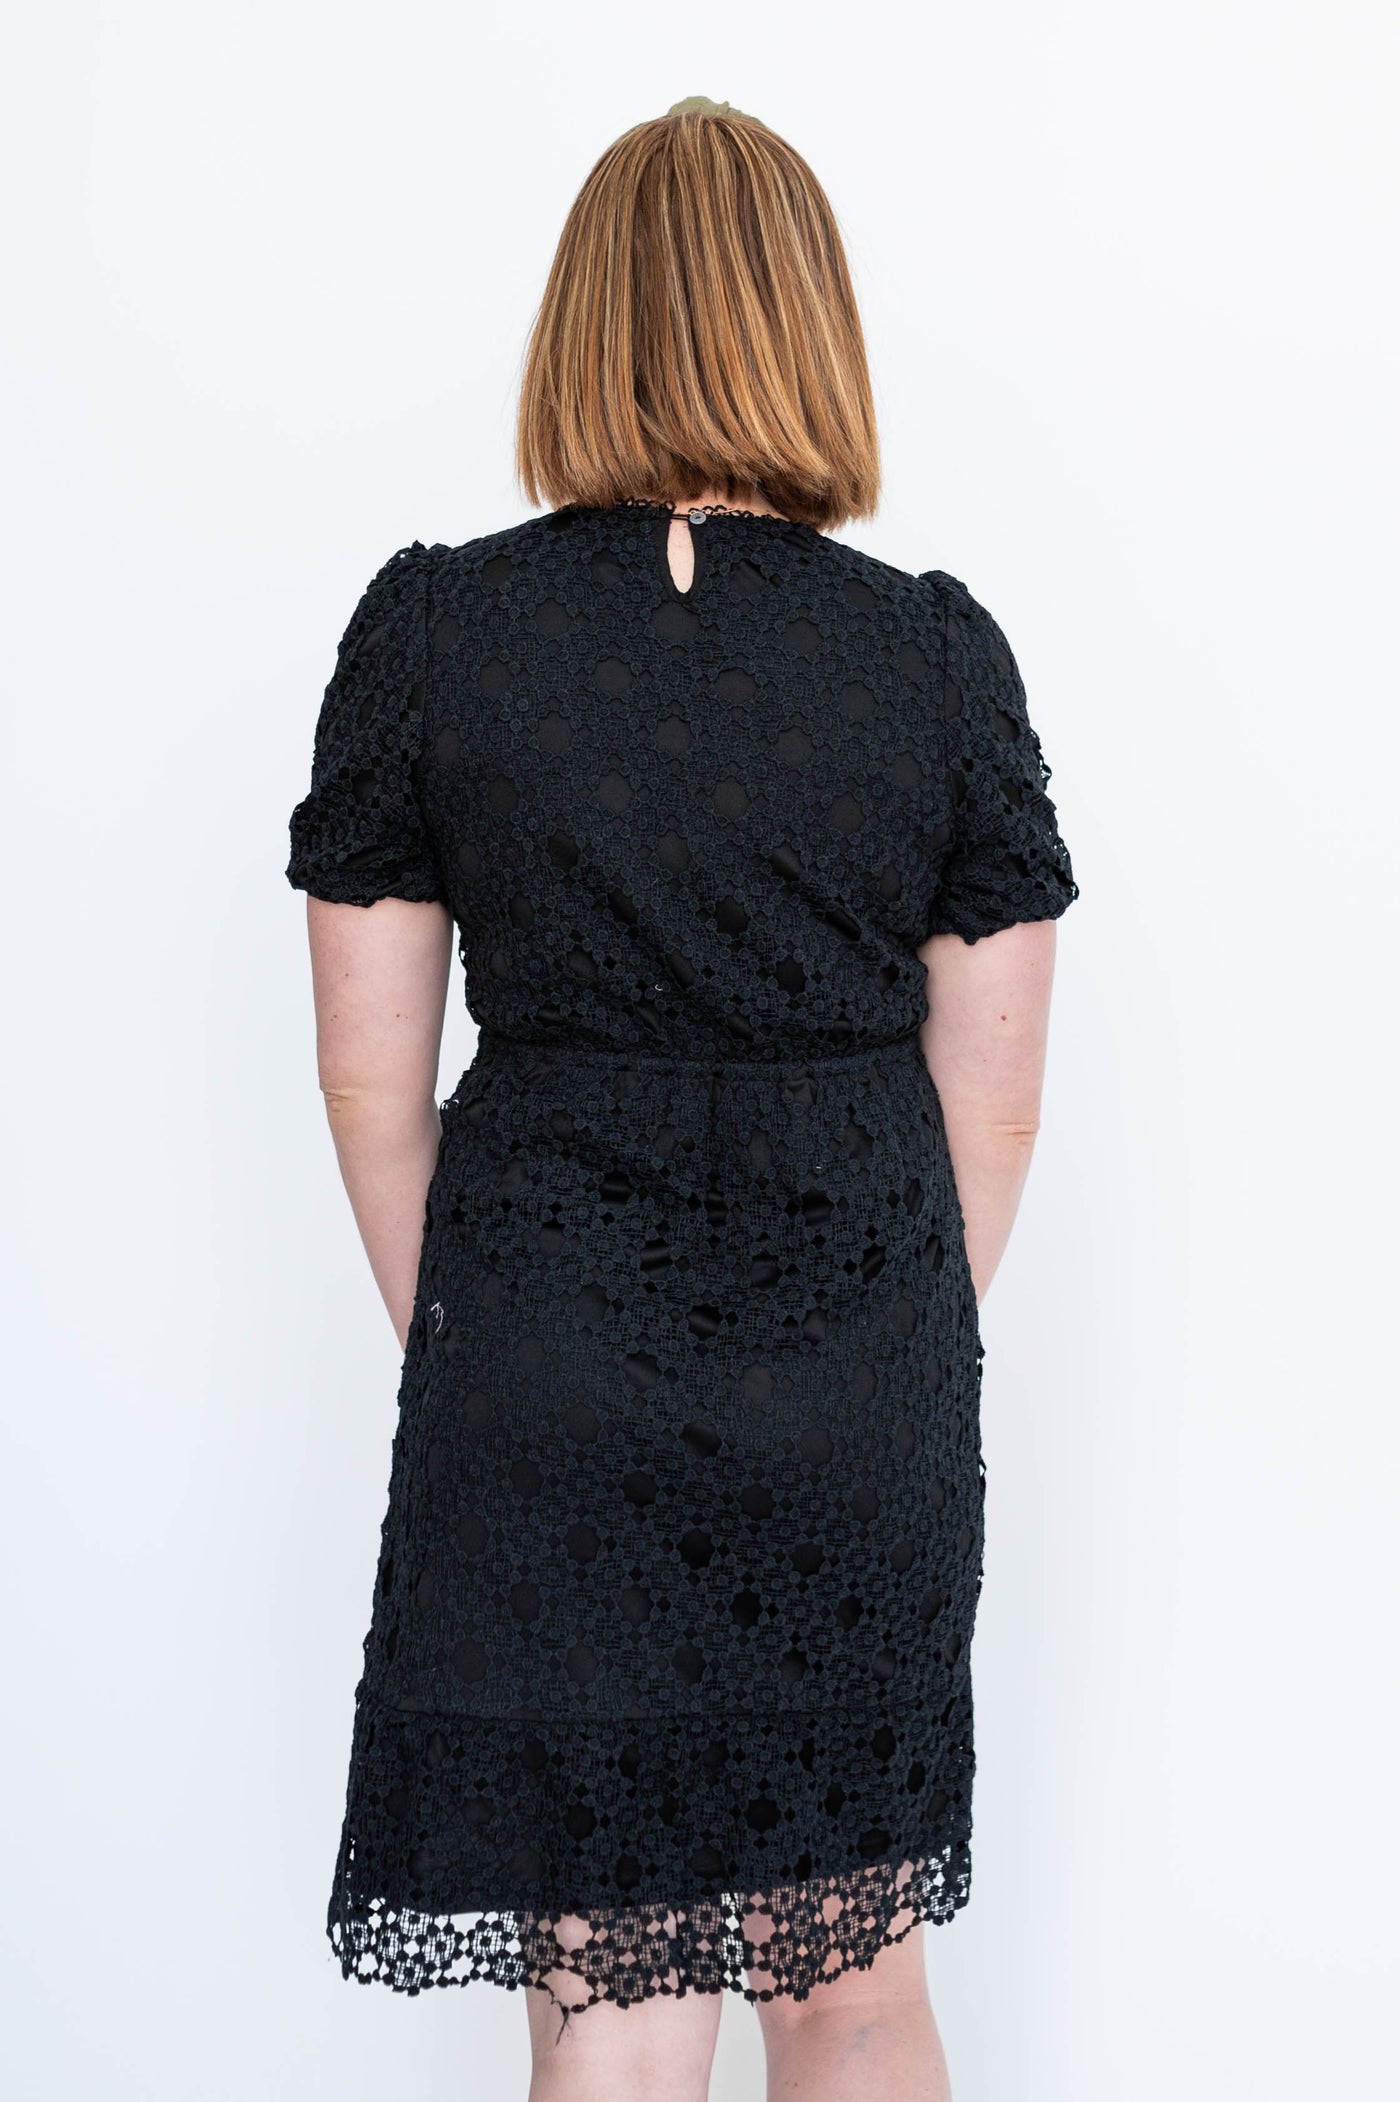 Back view of a short sleeve black lace dress